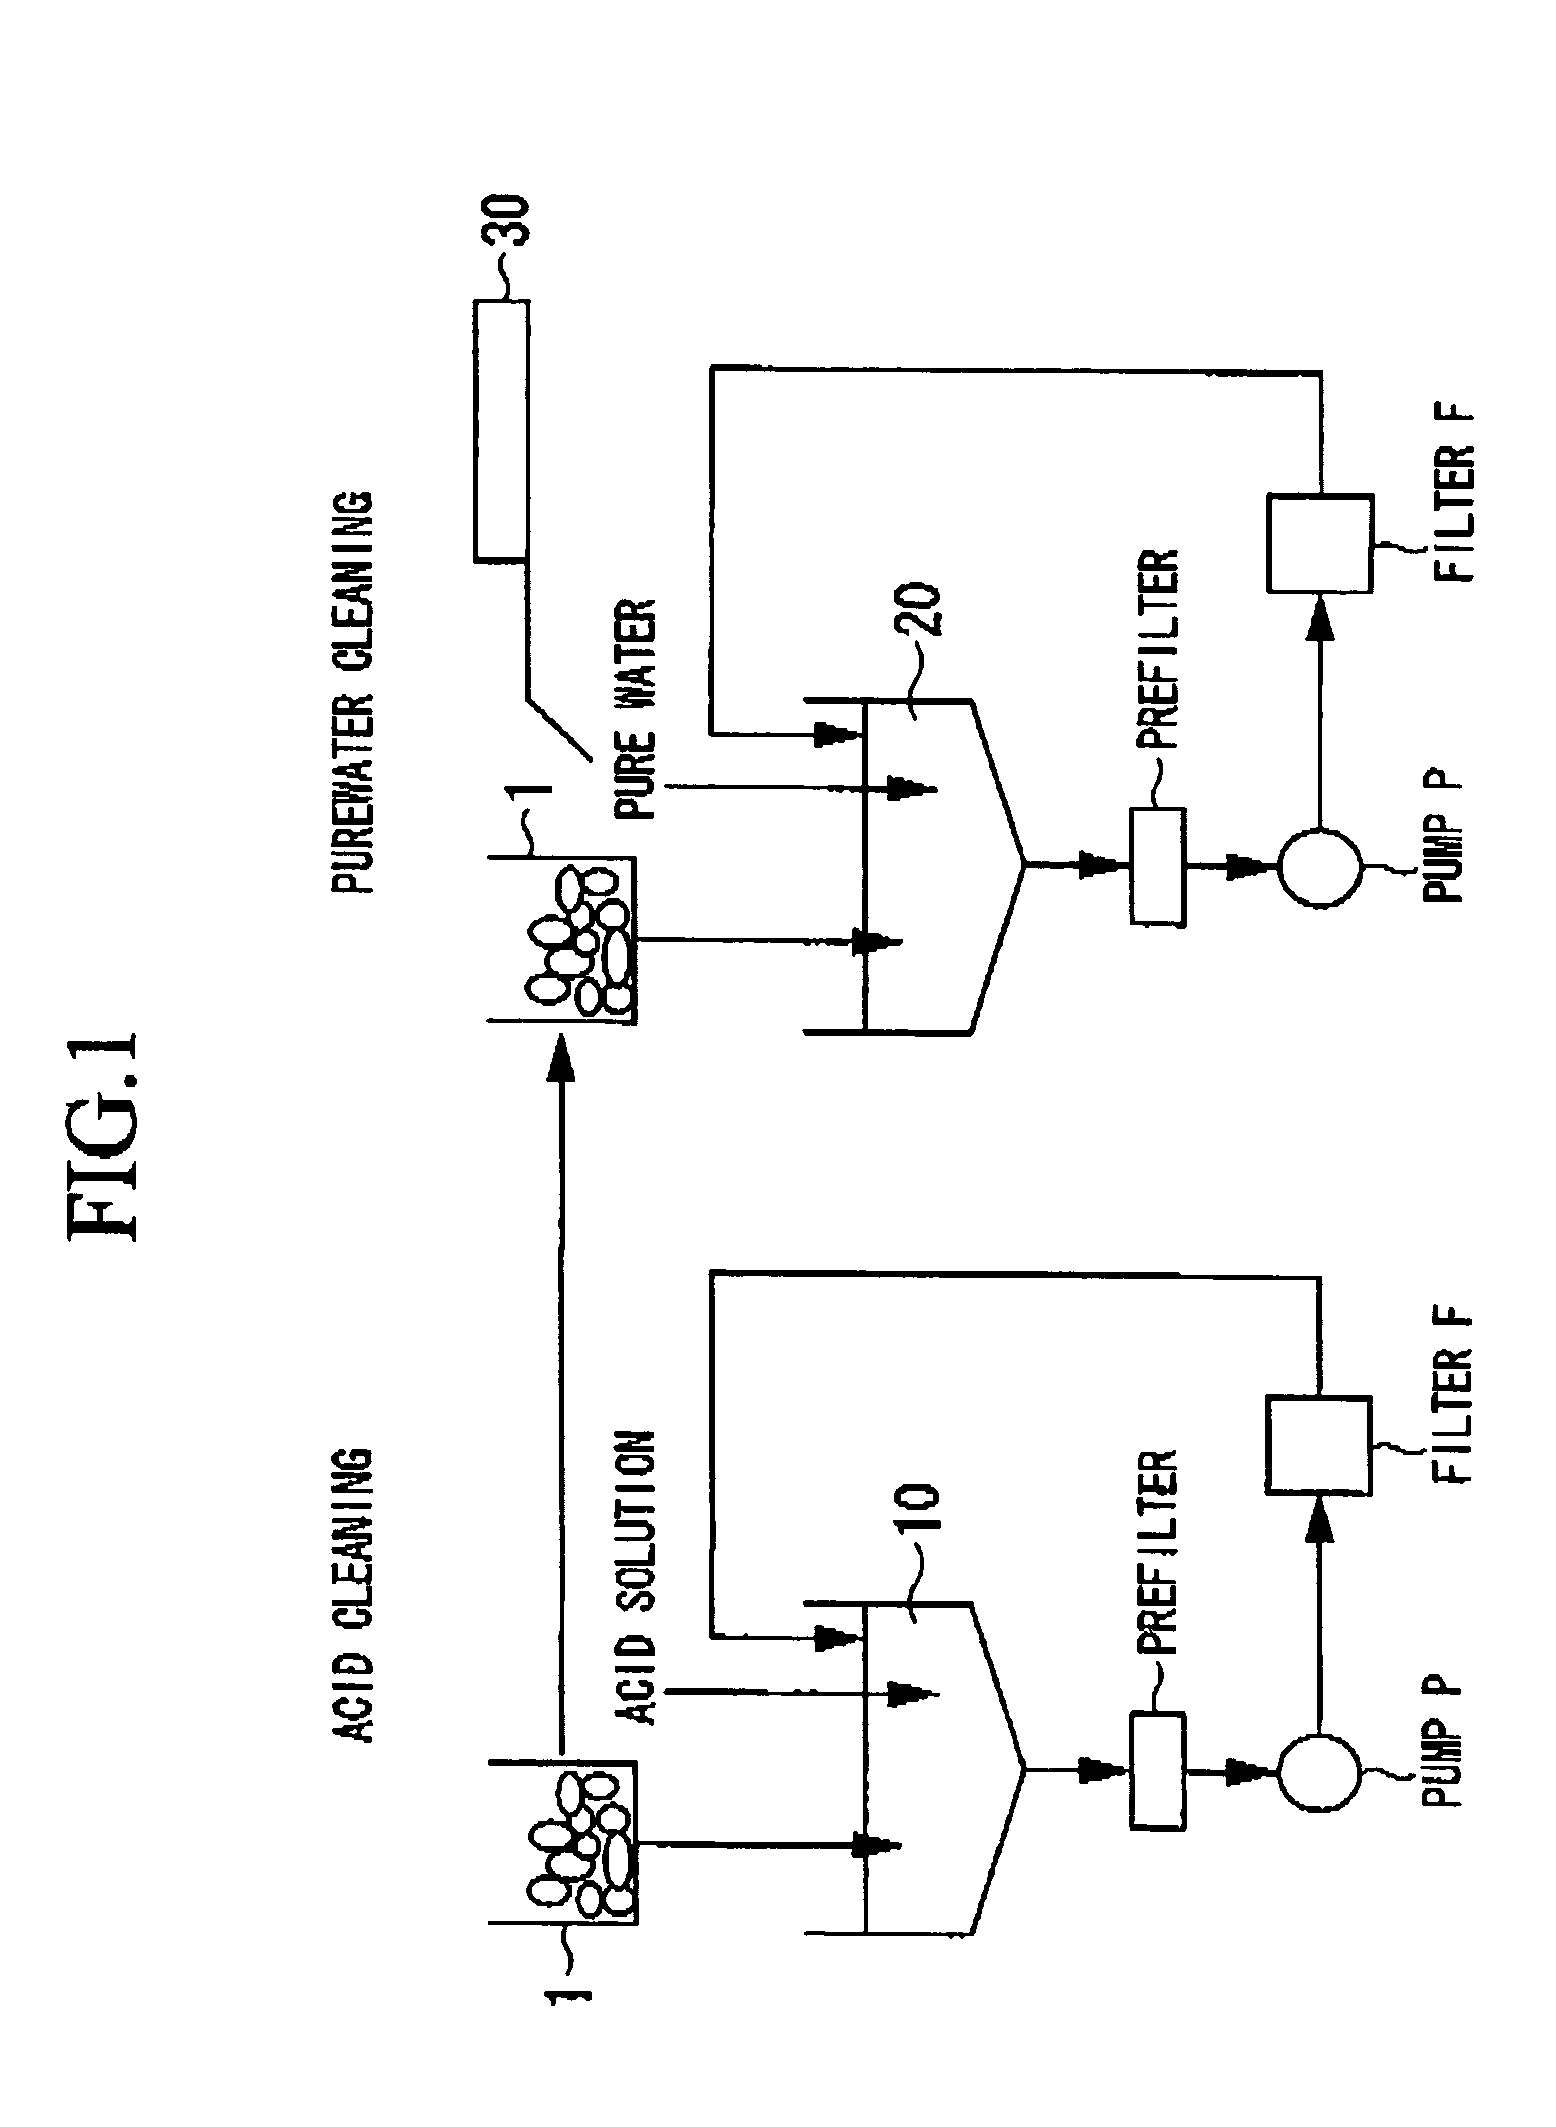 Silicon cleaning method for semiconductor materials and polycrystalline silicon chunk